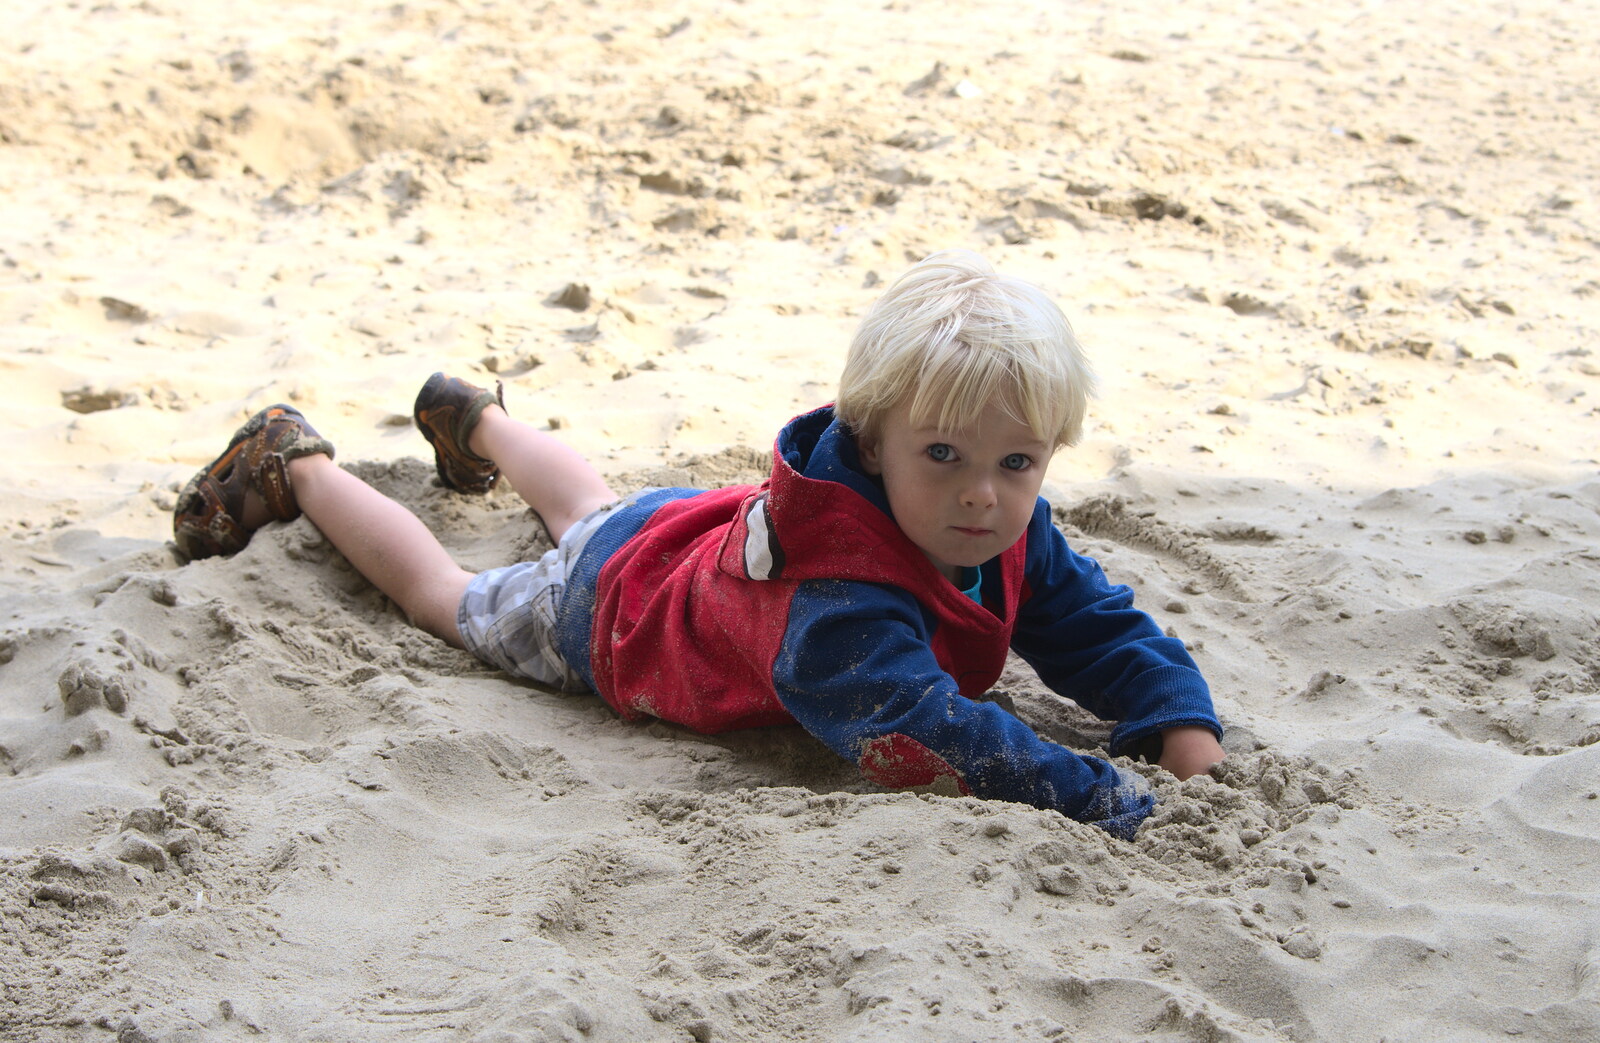 Harry - Baby Gabey - messes around in the sand from Camping at Silver Strand, Wicklow, County Wicklow, Ireland - 7th August 2014